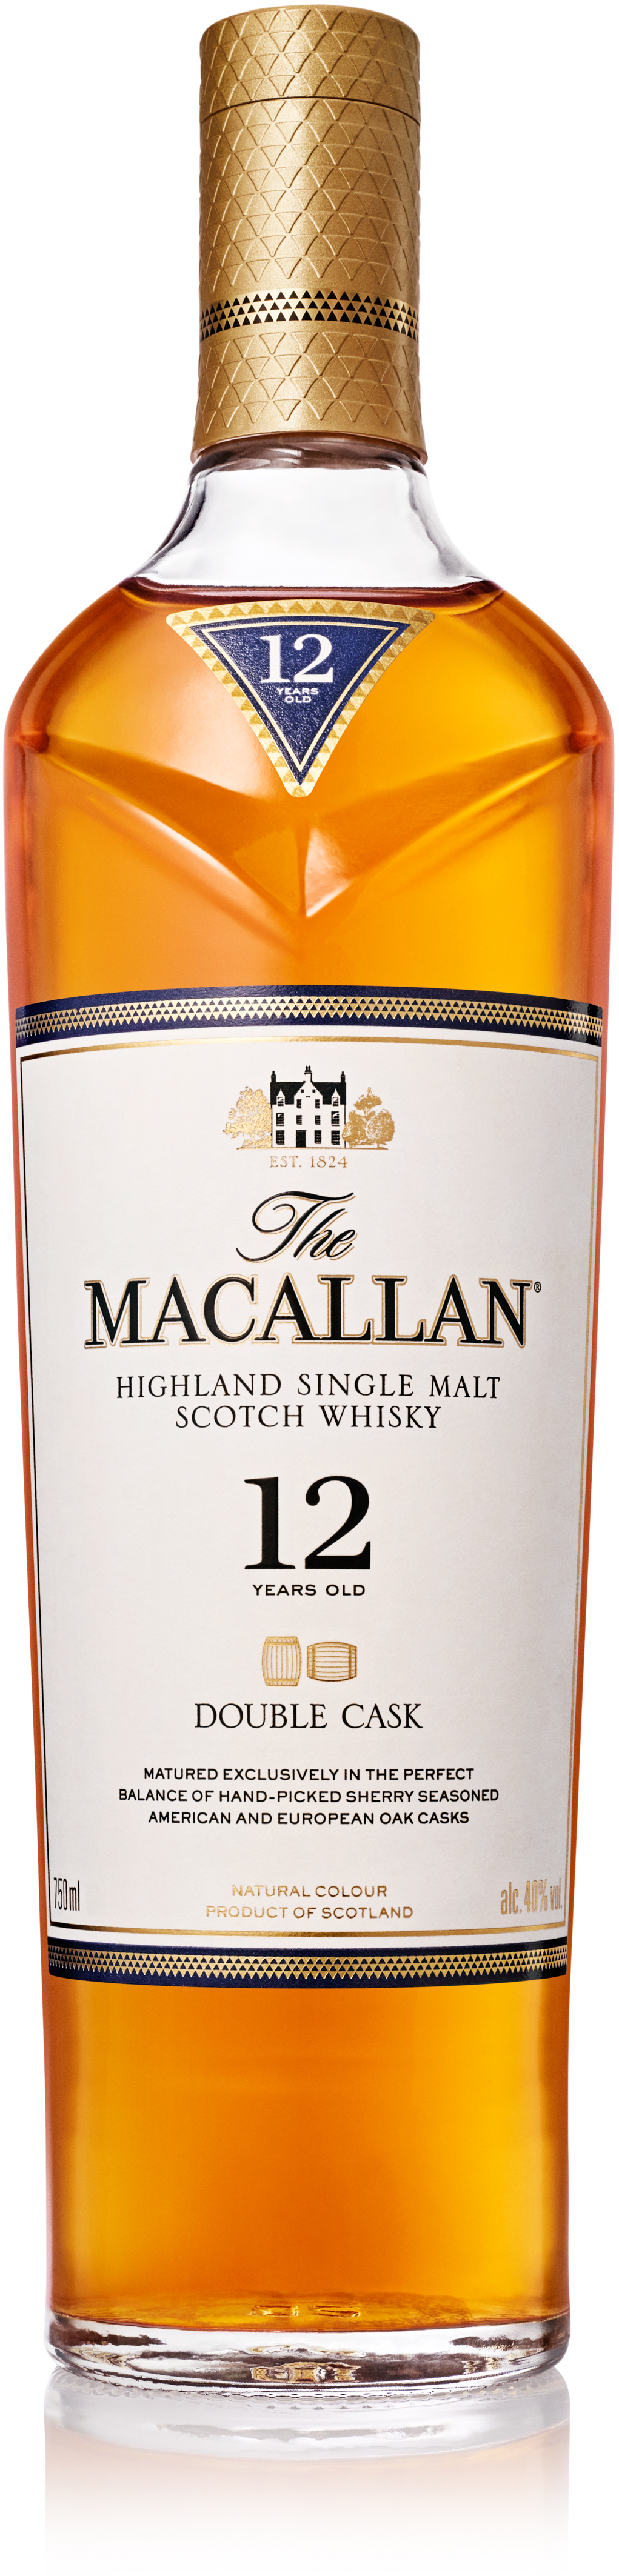 The Macallan 12 Year Old Double Cask Single Malt Scotch Whisky 1.75L